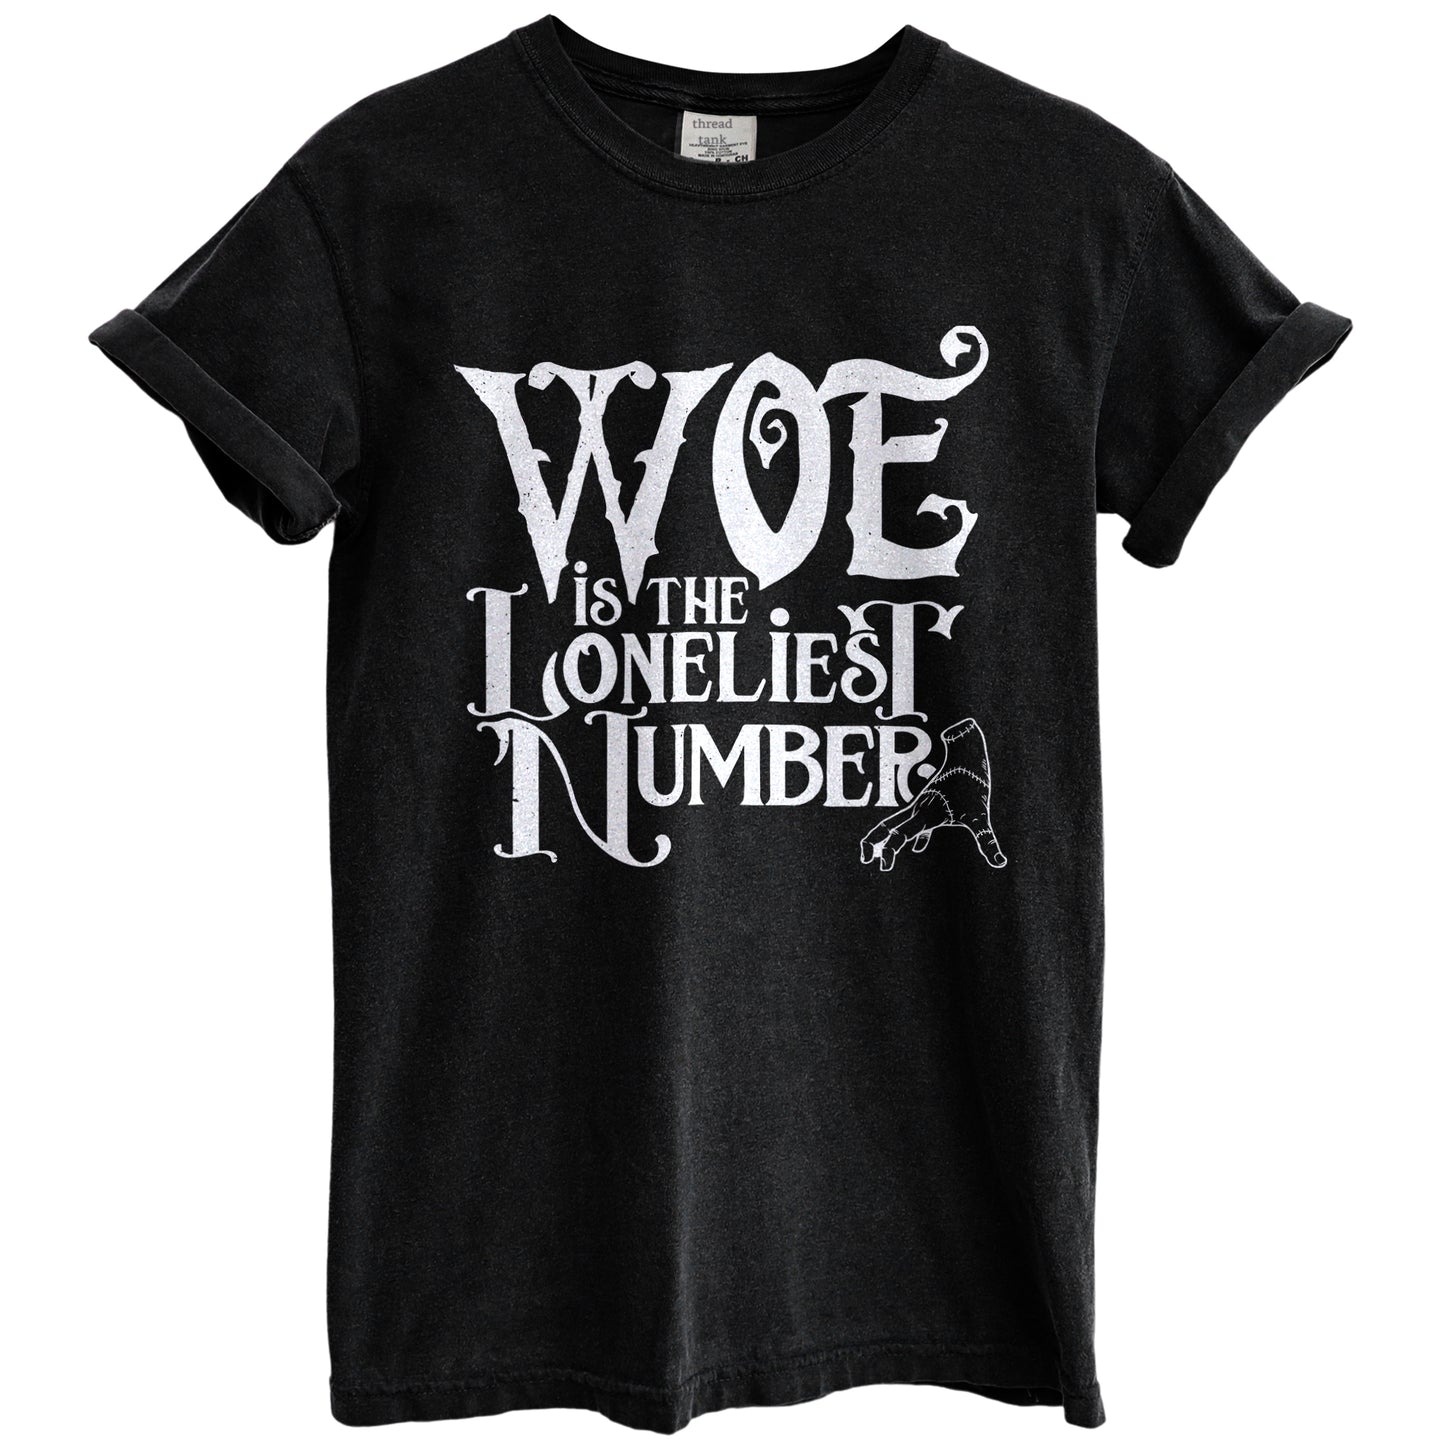 Woe Is the Loneliest Number Garment-Dyed Tee